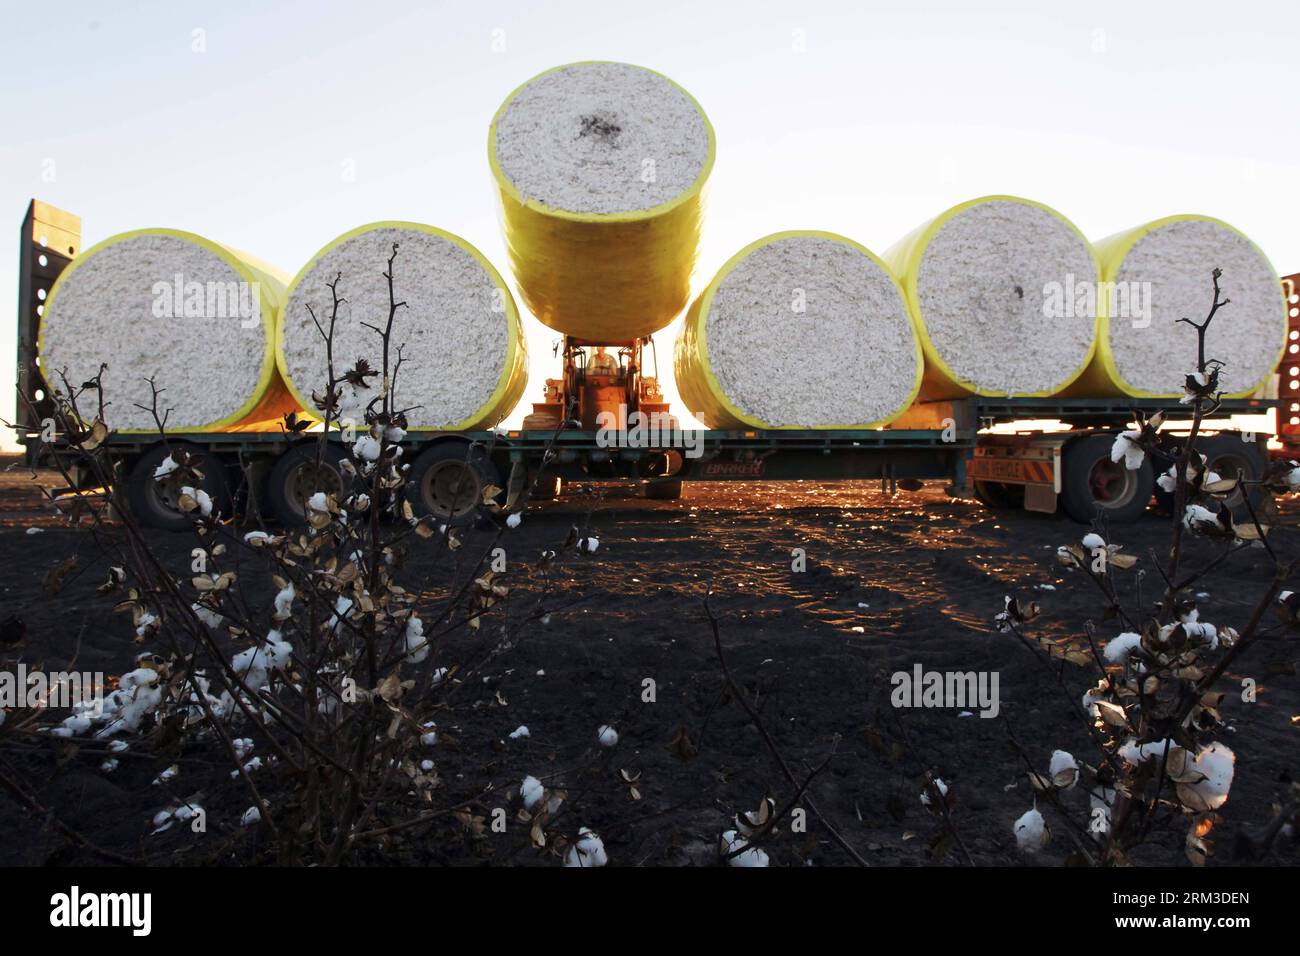 Bildnummer: 60154765  Datum: 17.07.2013  Copyright: imago/Xinhua SYDNEY, July 17 2013 - A roll of cotton is loaded at UNIBALE, a subsidiary of Chinatex Corporation, in Moree, New South Wales, Australia, on July 17, 2013. Chinatex Corporation purchased the cotton base to plant cotton in Moree in early 1990s. The base, covering an area of 5,200 hectares, owns the anual productivity of more than 2,700,000 kg unginned cotton and provides mainly for Chinatex Corporation and partly for international market. (Xinhua/Jin Linpeng) (lr) AUSTRALIA-NEW SOUTH WALES-MOREE-CHINATEX CORP-COTTON BASE-UNIBALE P Stock Photo